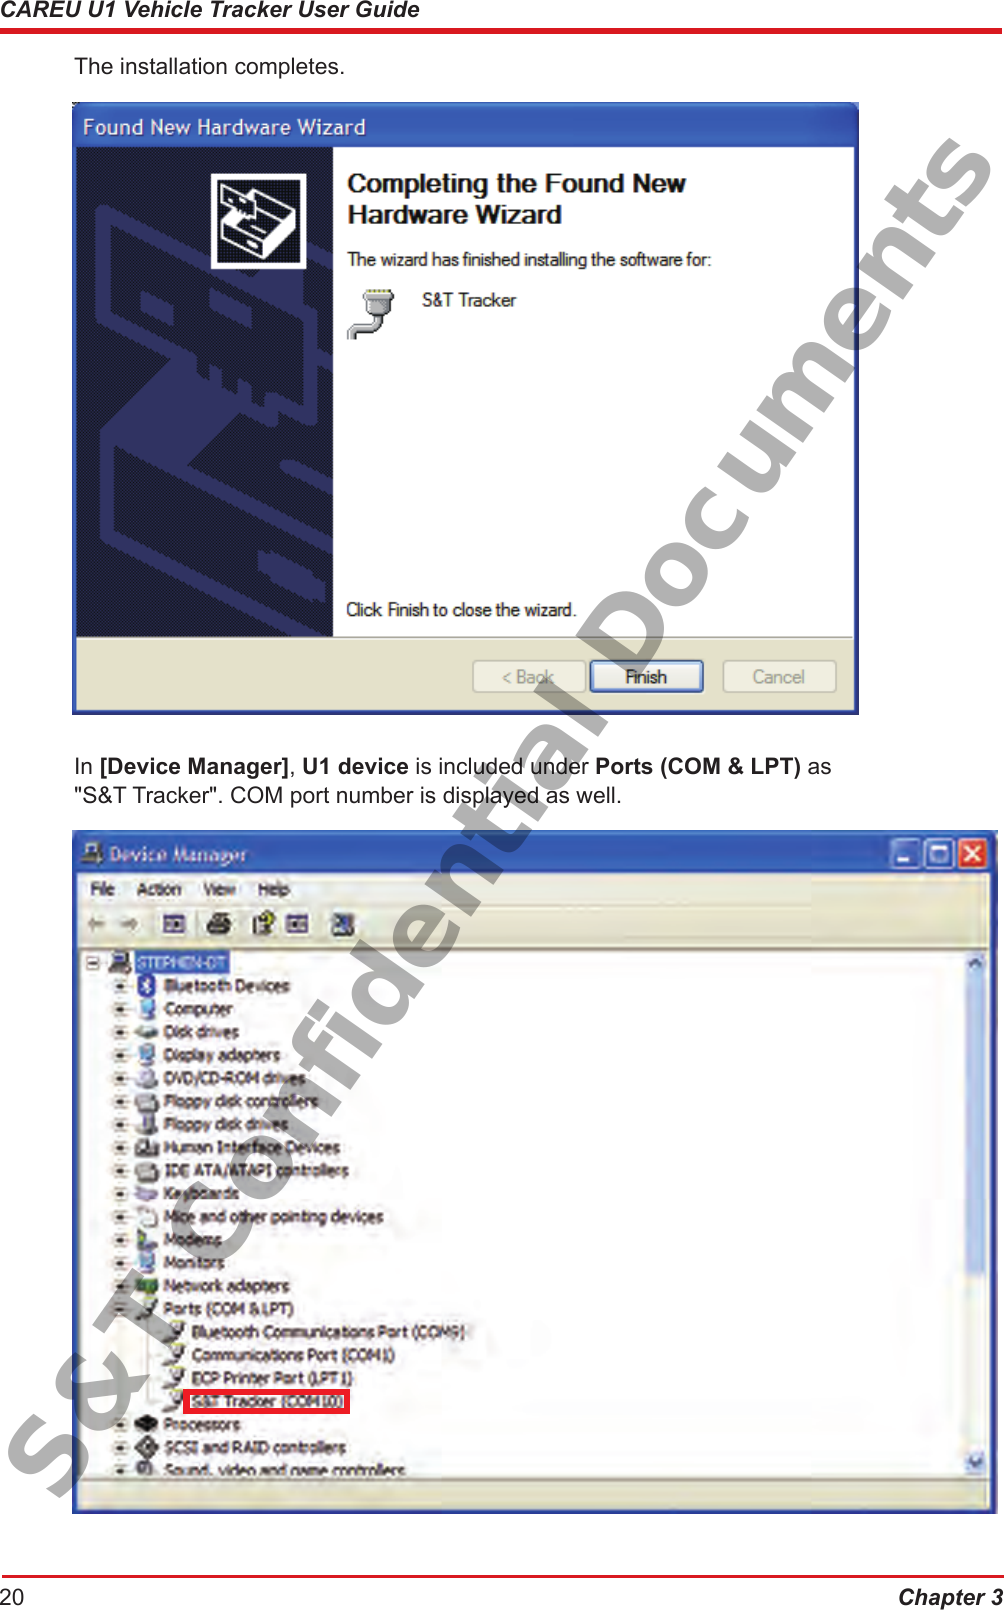 Chapter 320CAREU U1 Vehicle Tracker User Guide  The installation completes.   In [Device Manager], U1 device is included under Ports (COM &amp; LPT) as        &quot;S&amp;T Tracker&quot;. COM port number is displayed as well.S&amp;T Confidential Documents